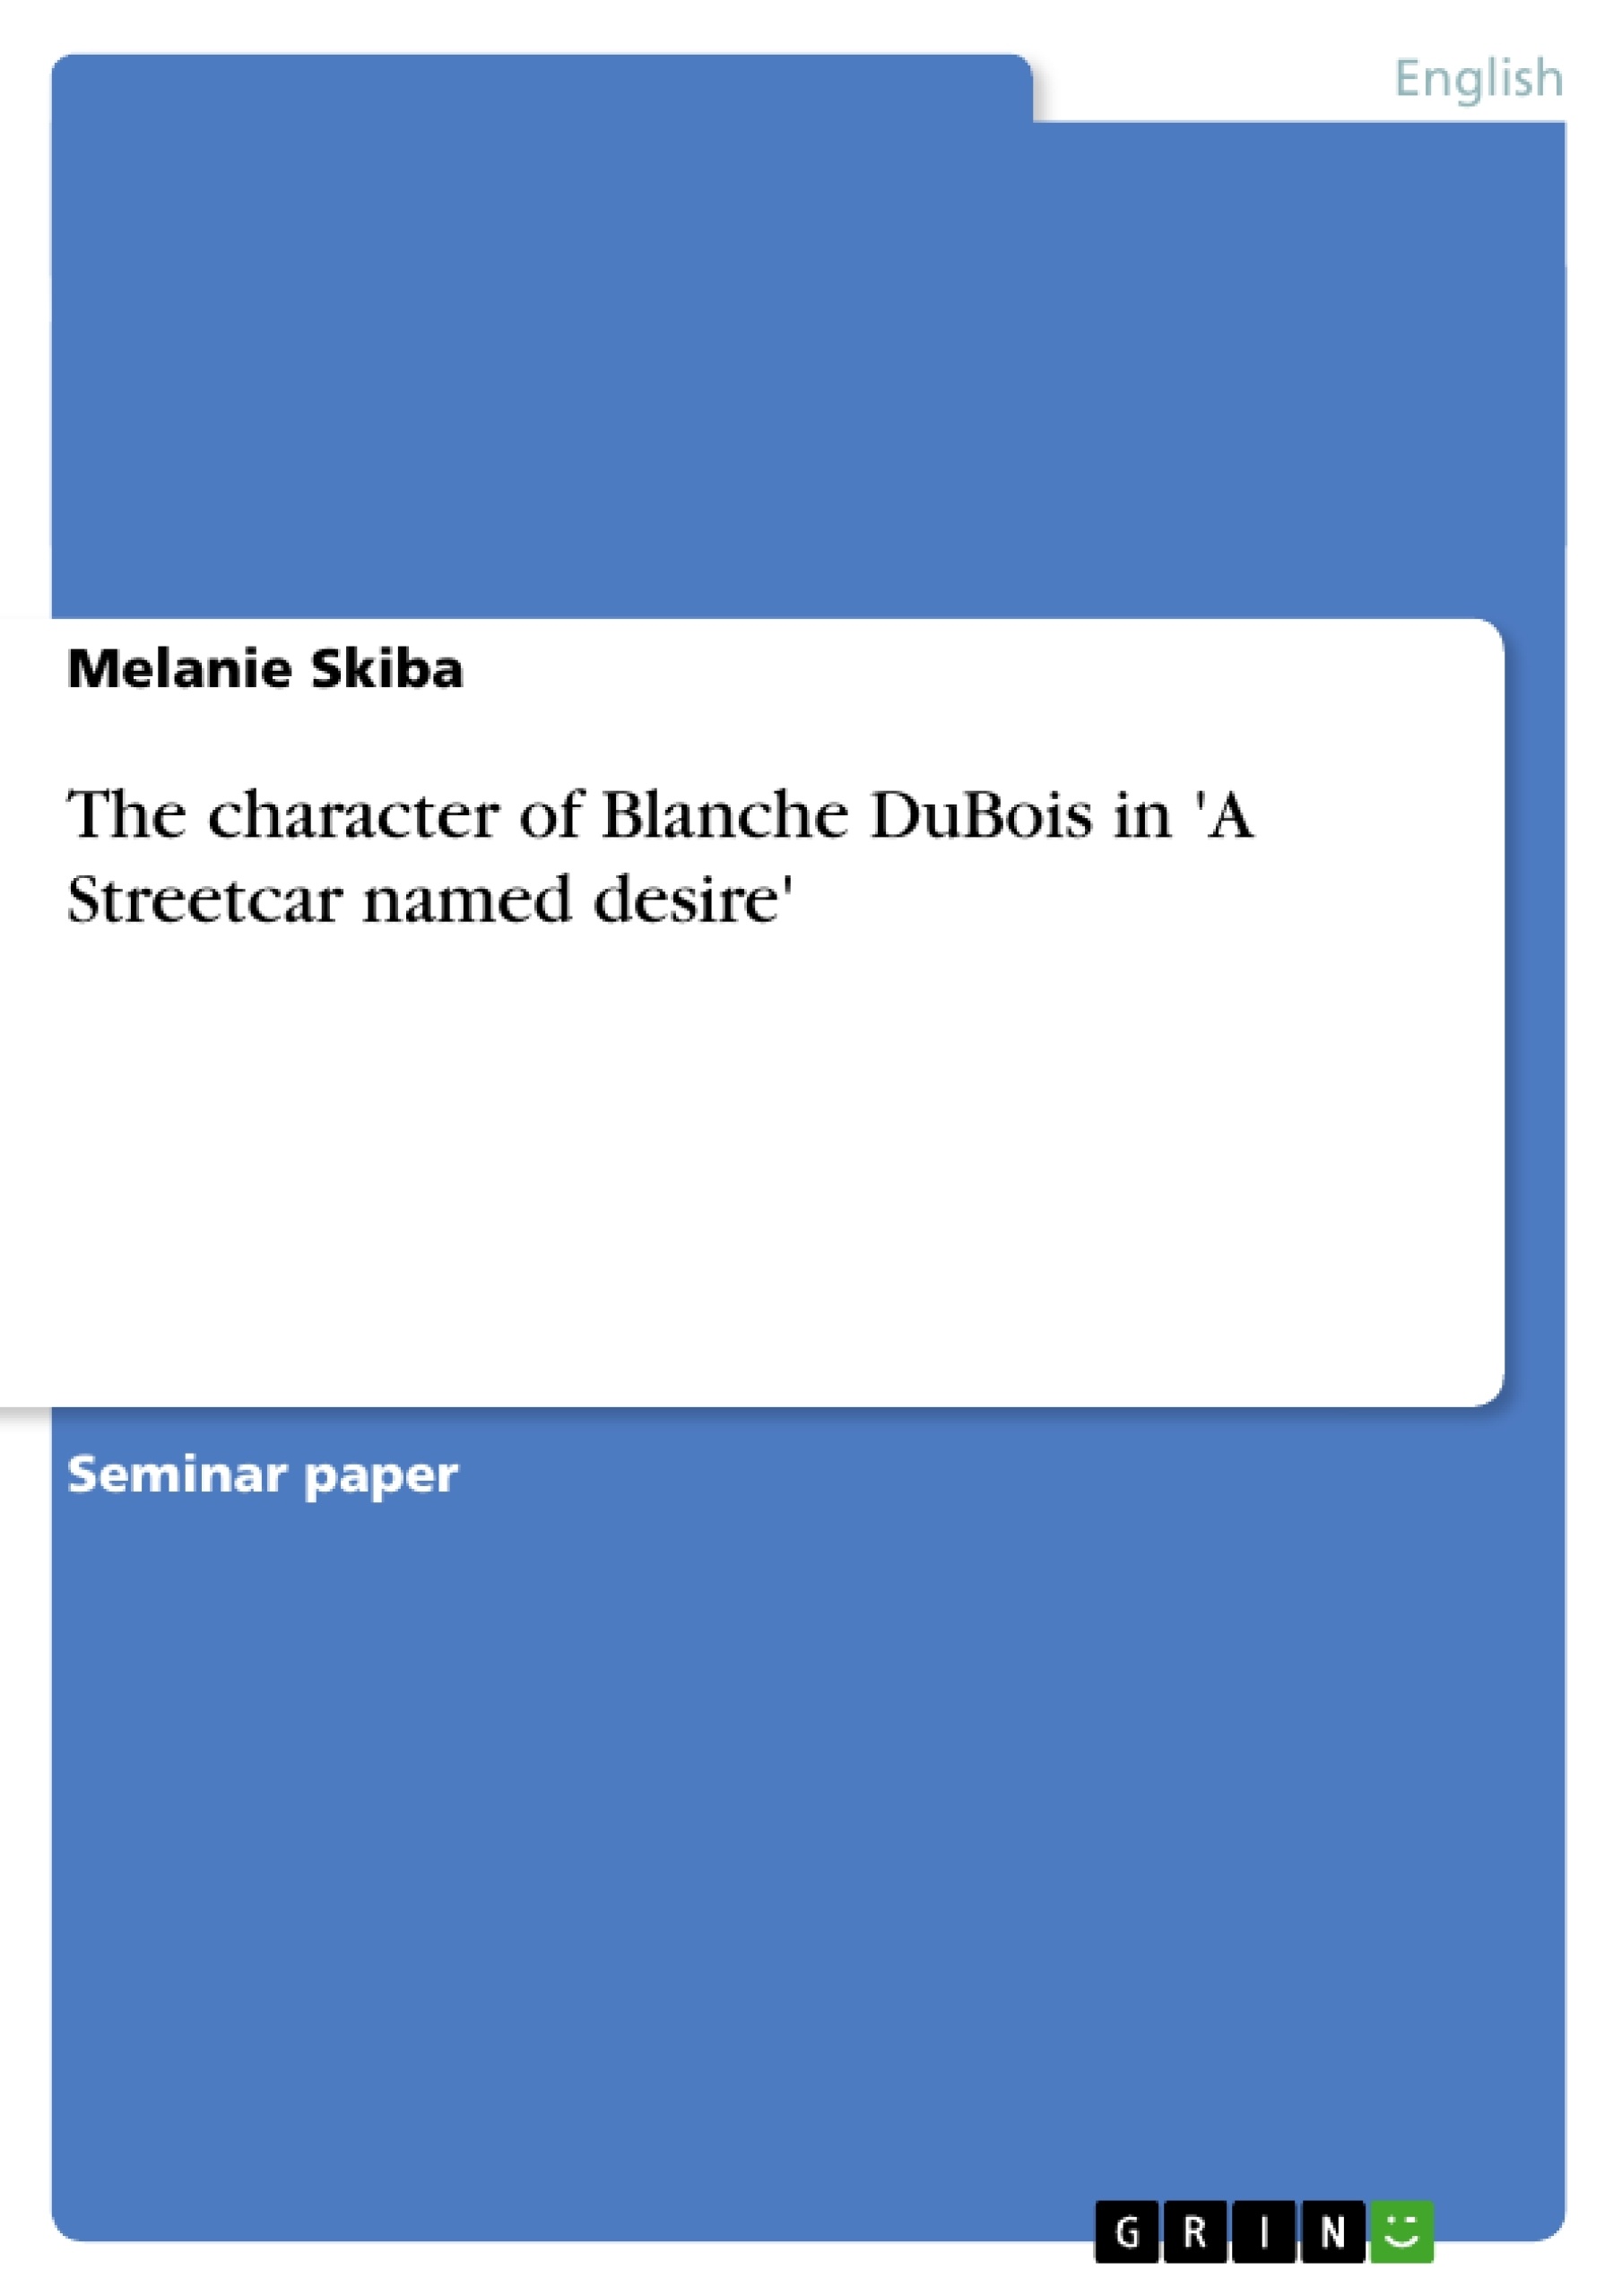 Title: The character of Blanche DuBois in 'A Streetcar named desire'